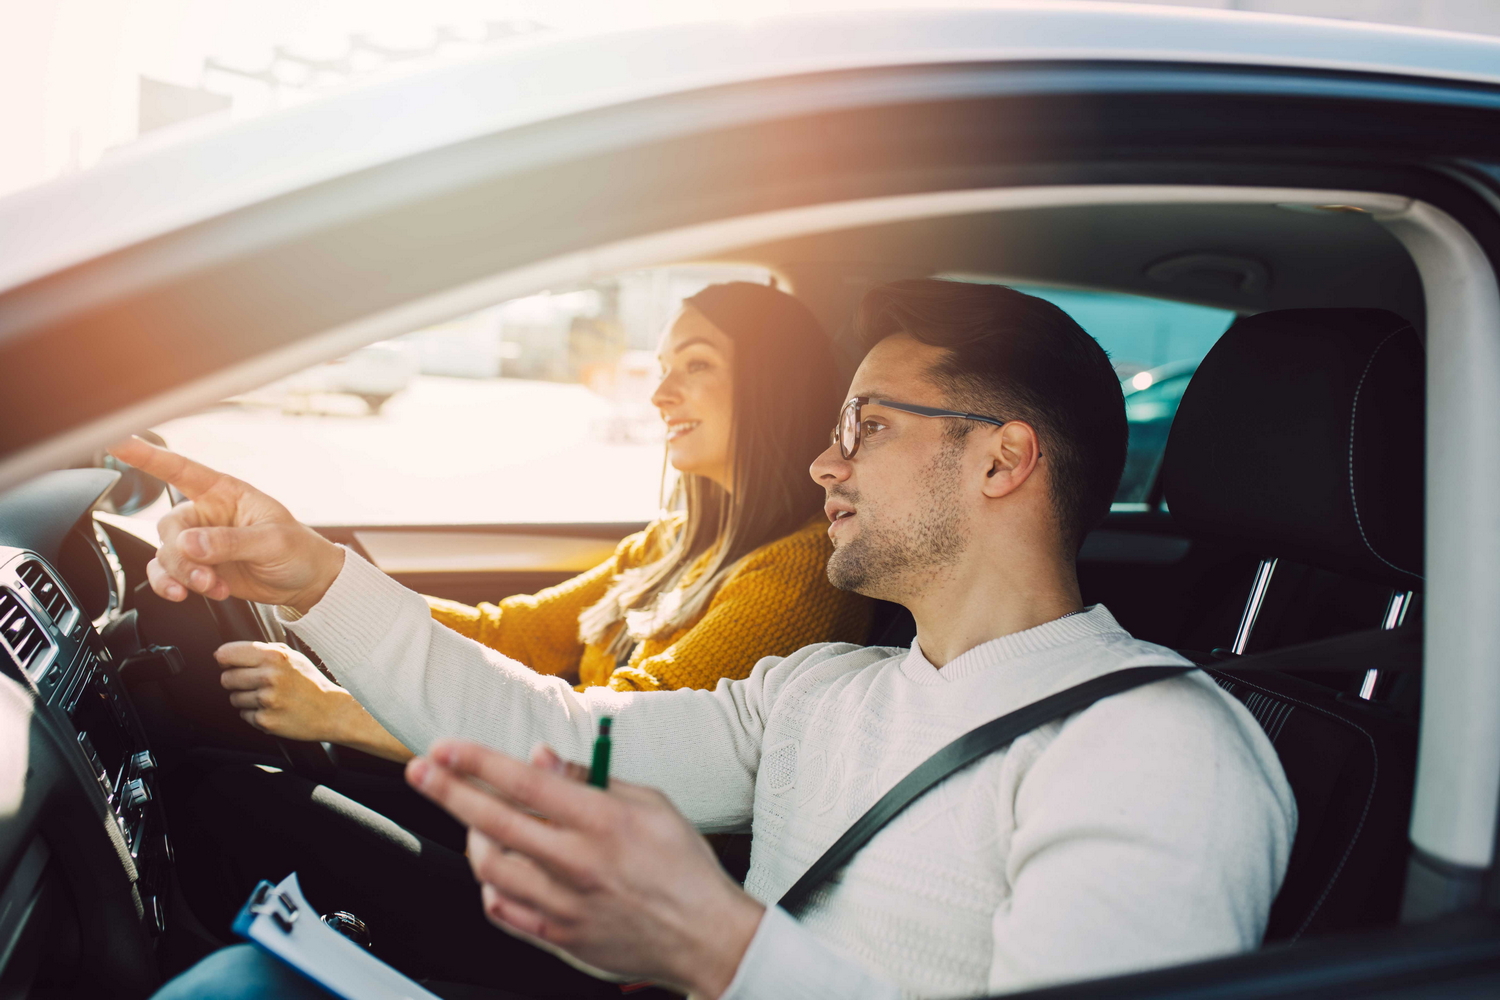 Car News | Driving test fails due to lack of practice? | CompleteCar.ie